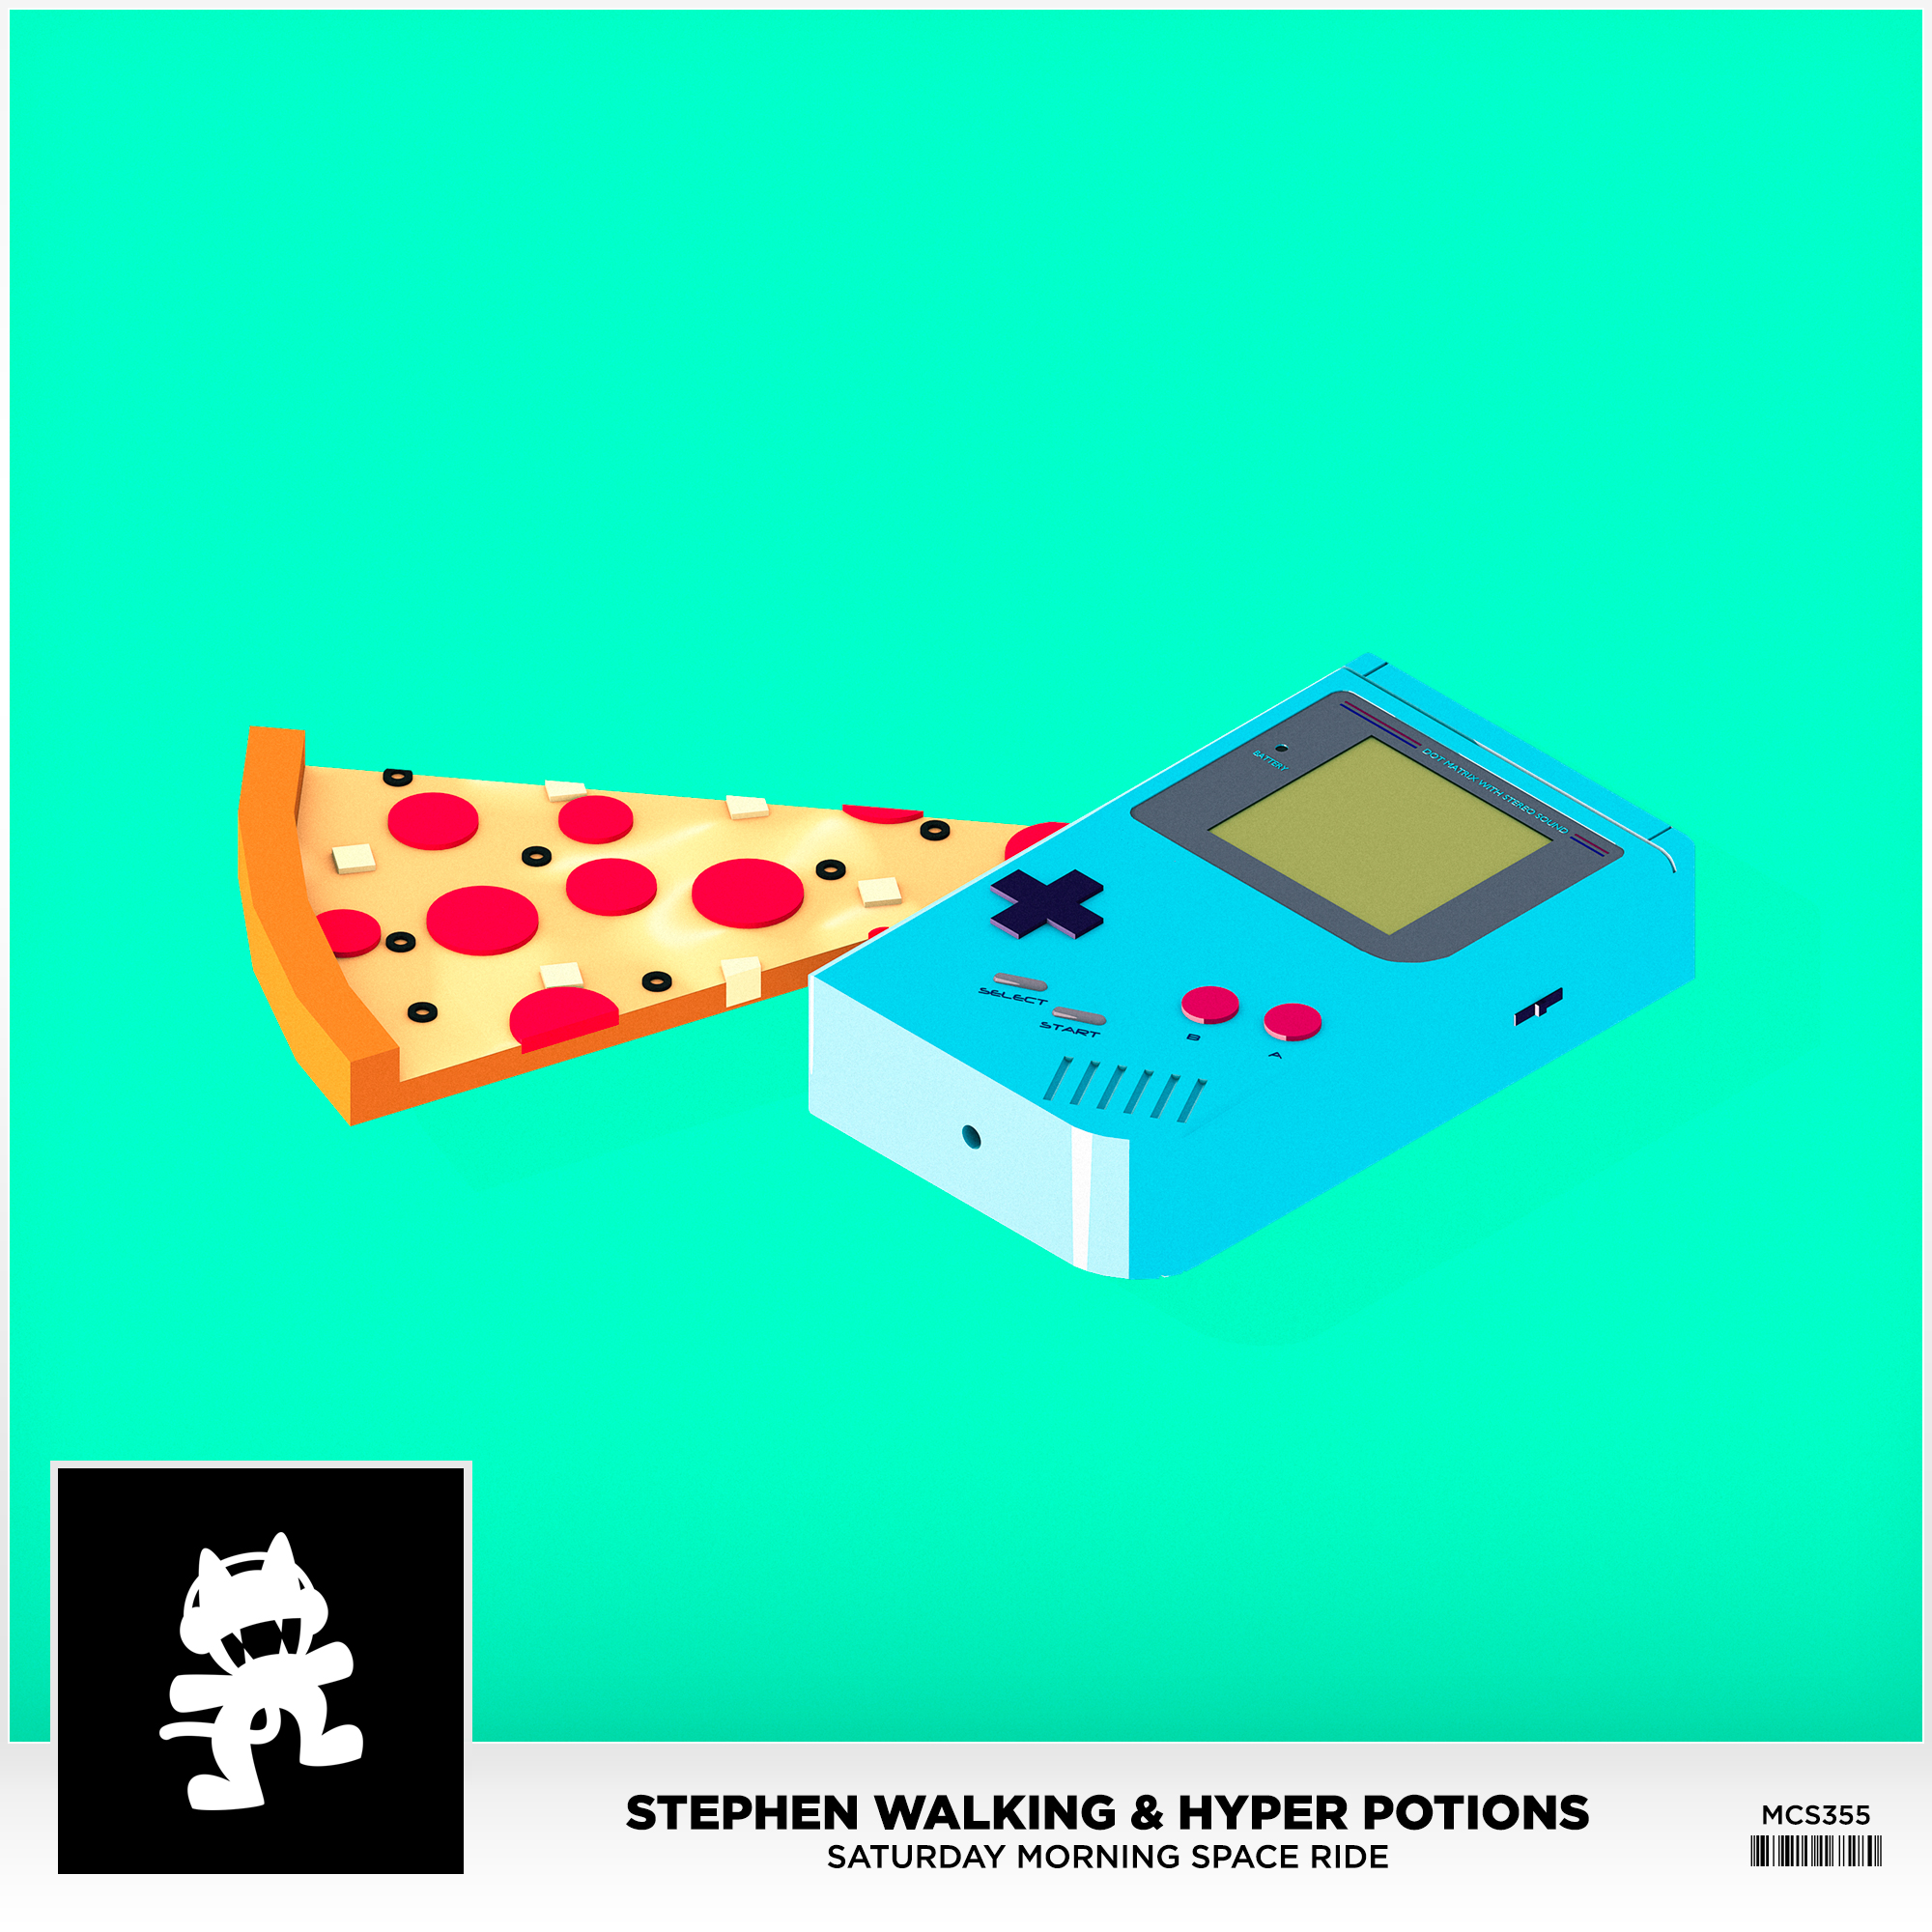 Stephen Walking & Hyper Potions - Saturday Morning Space Ride